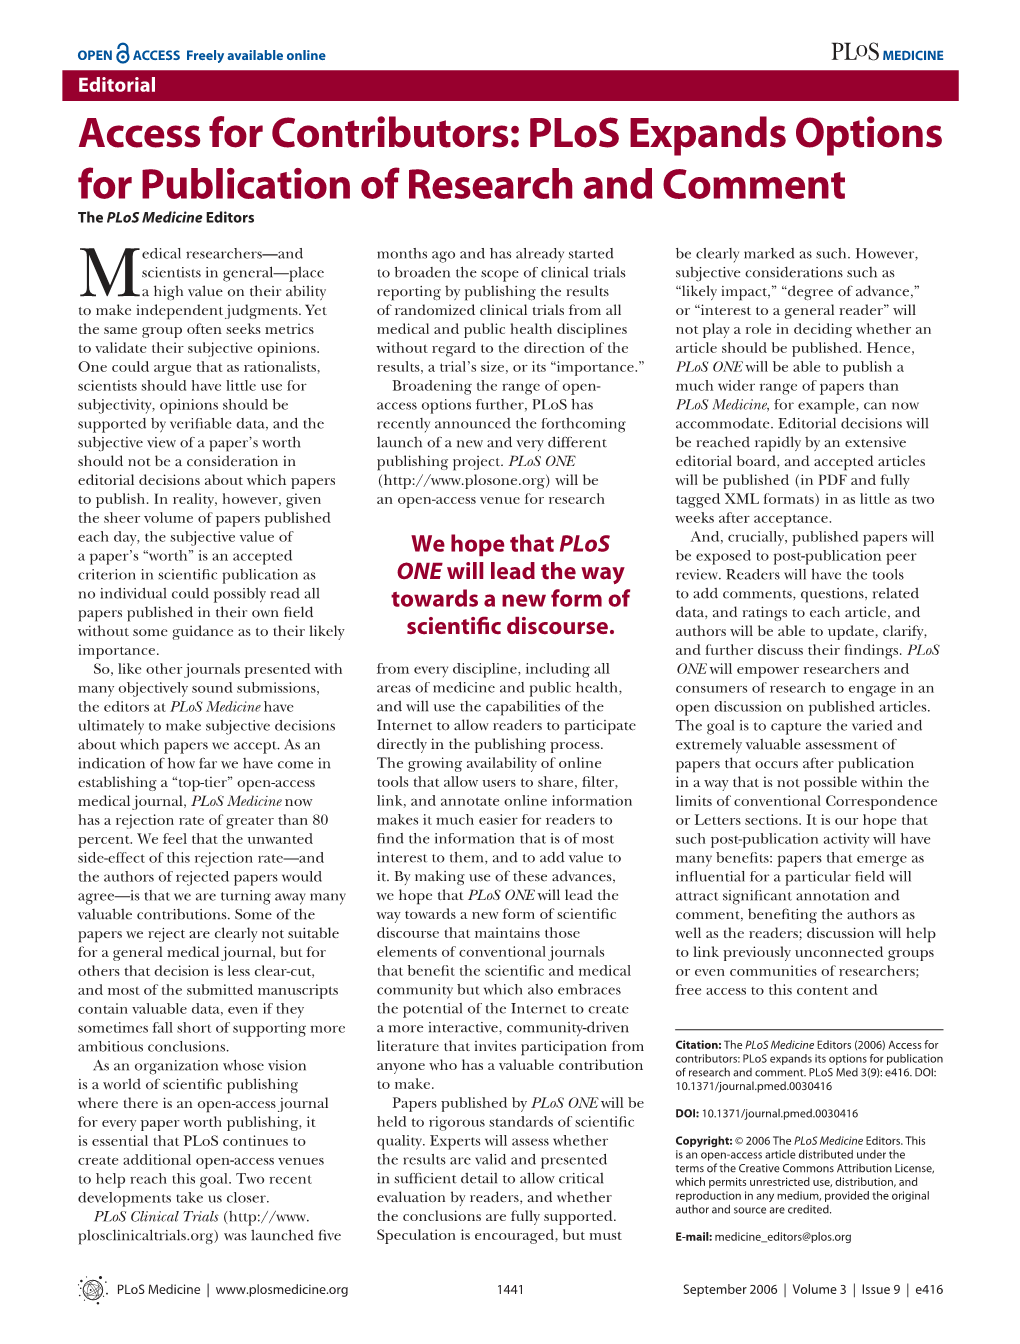 Plos Expands Options for Publication of Research and Comment the Plos Medicine Editors